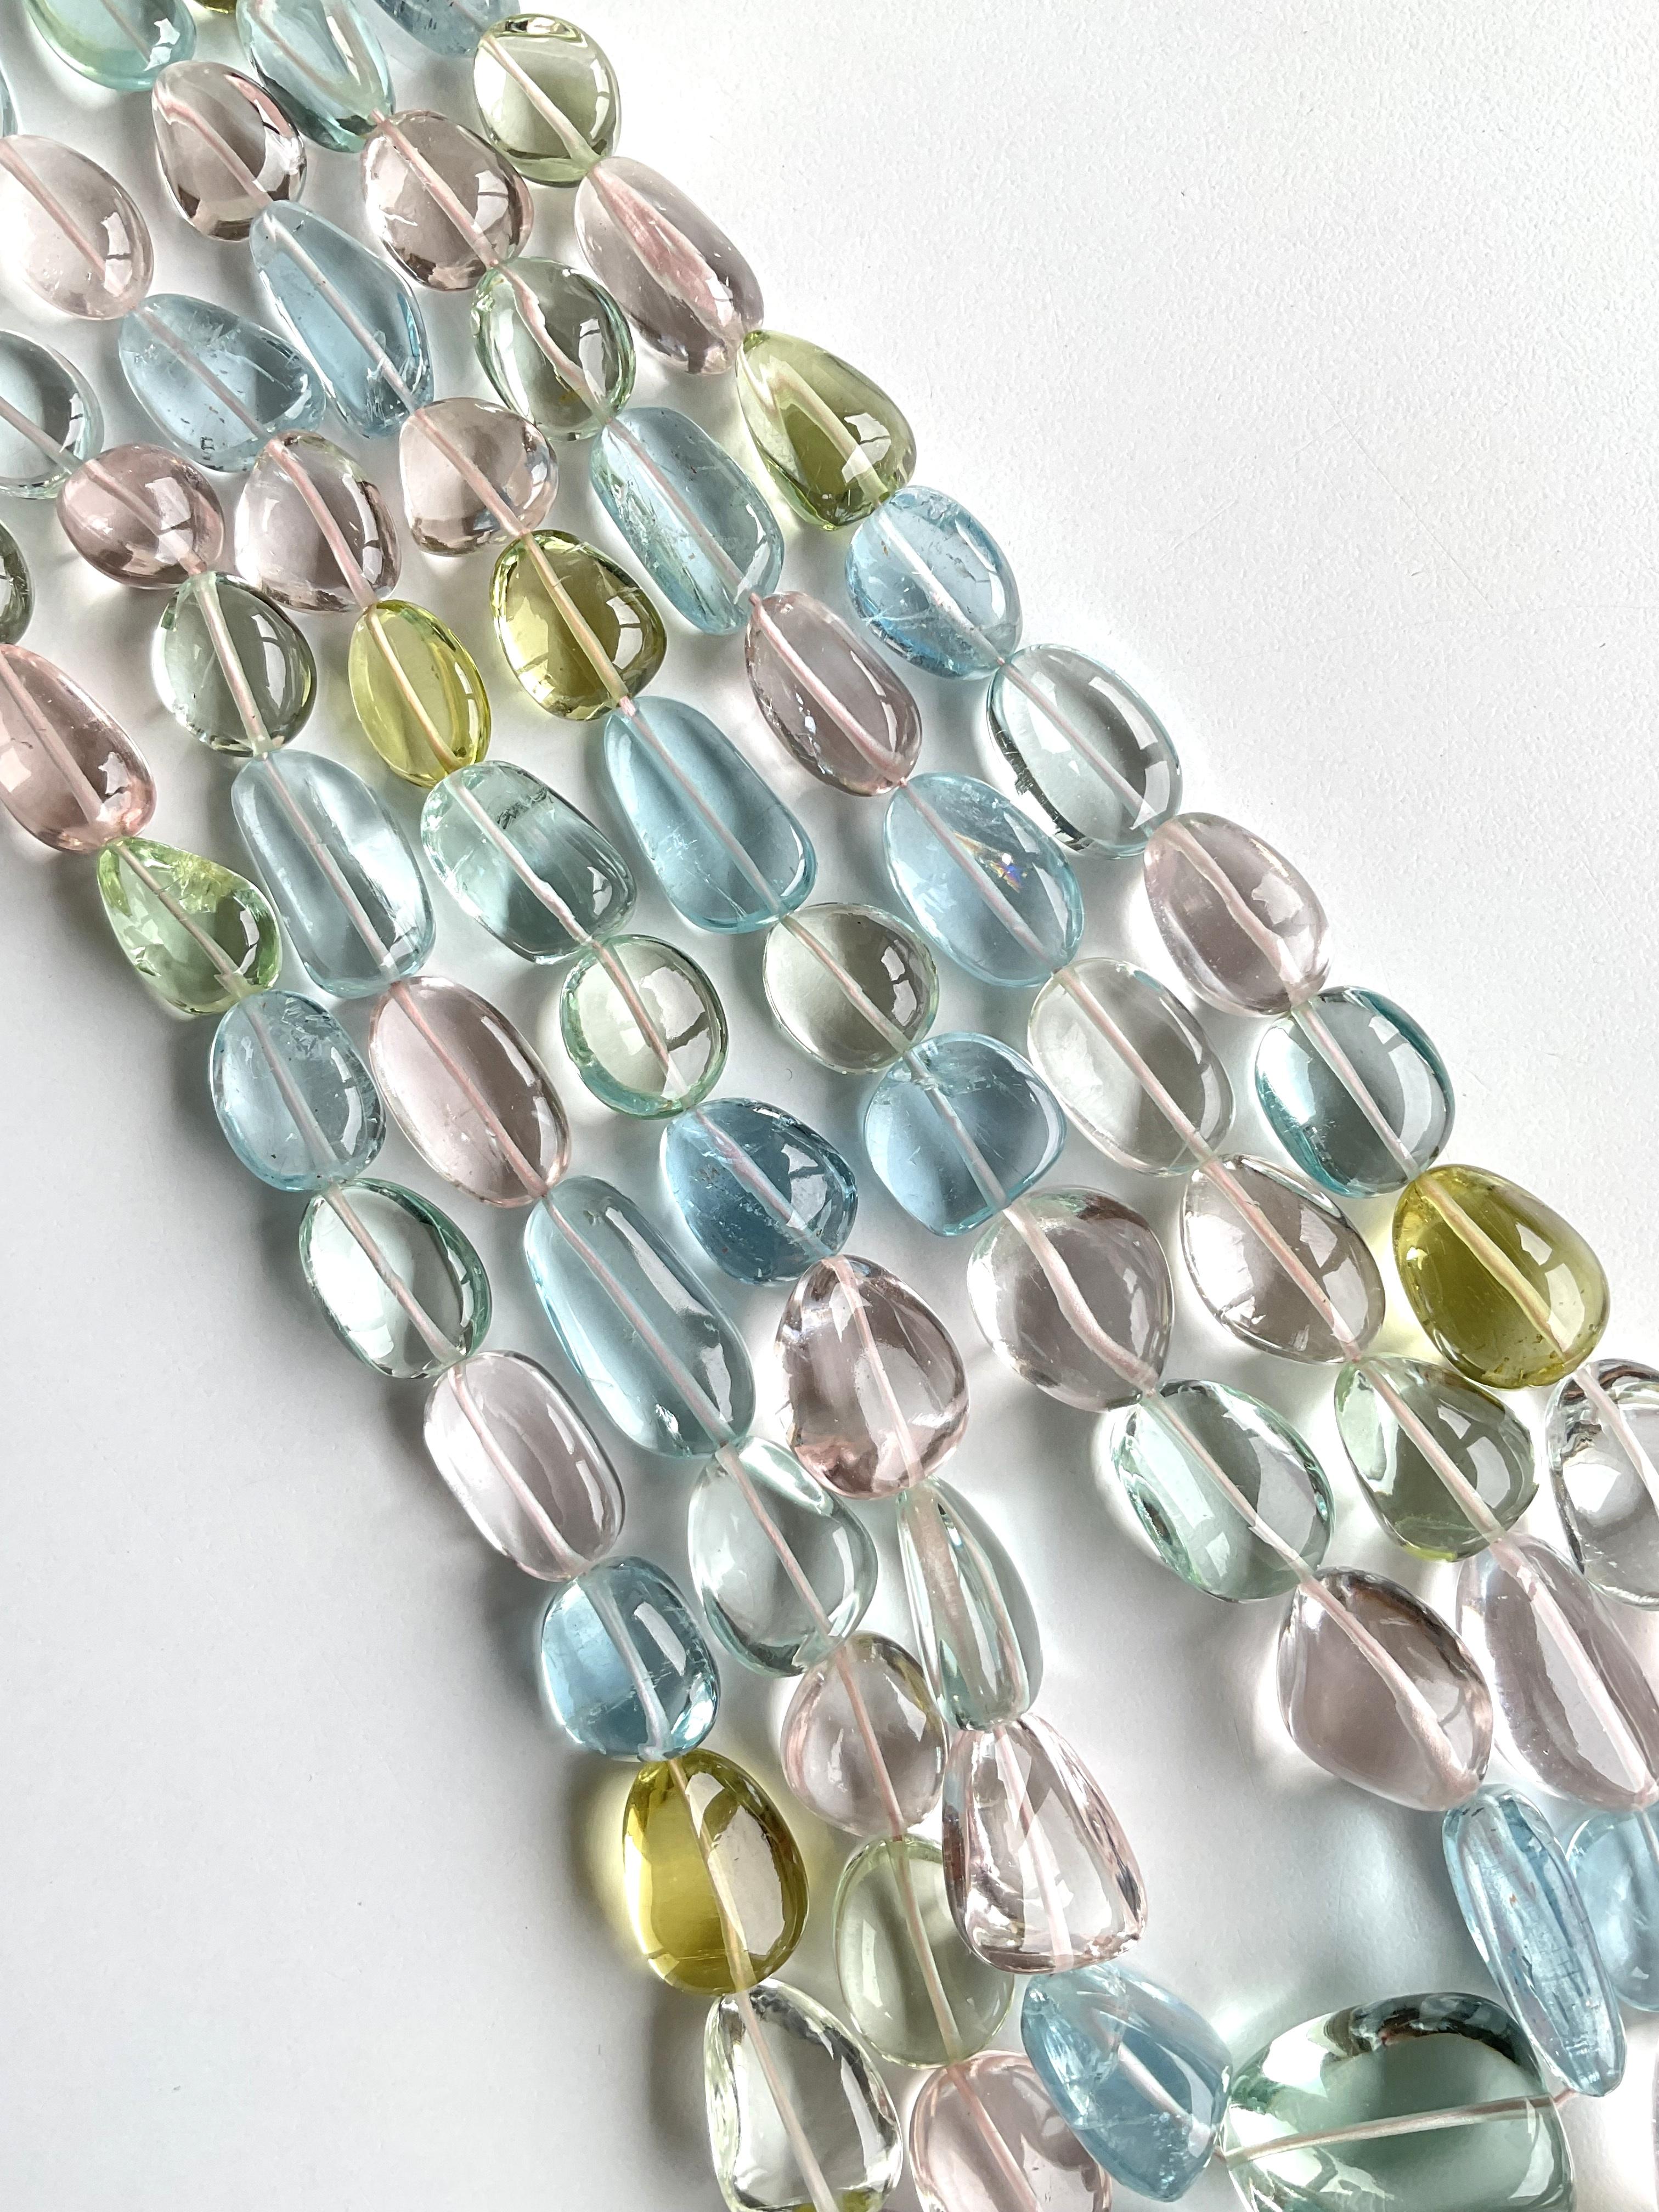 1362.55 Carats Multiple colors Beryl Tumbled Necklace For Fine Jewelry Gemstones For Sale 1